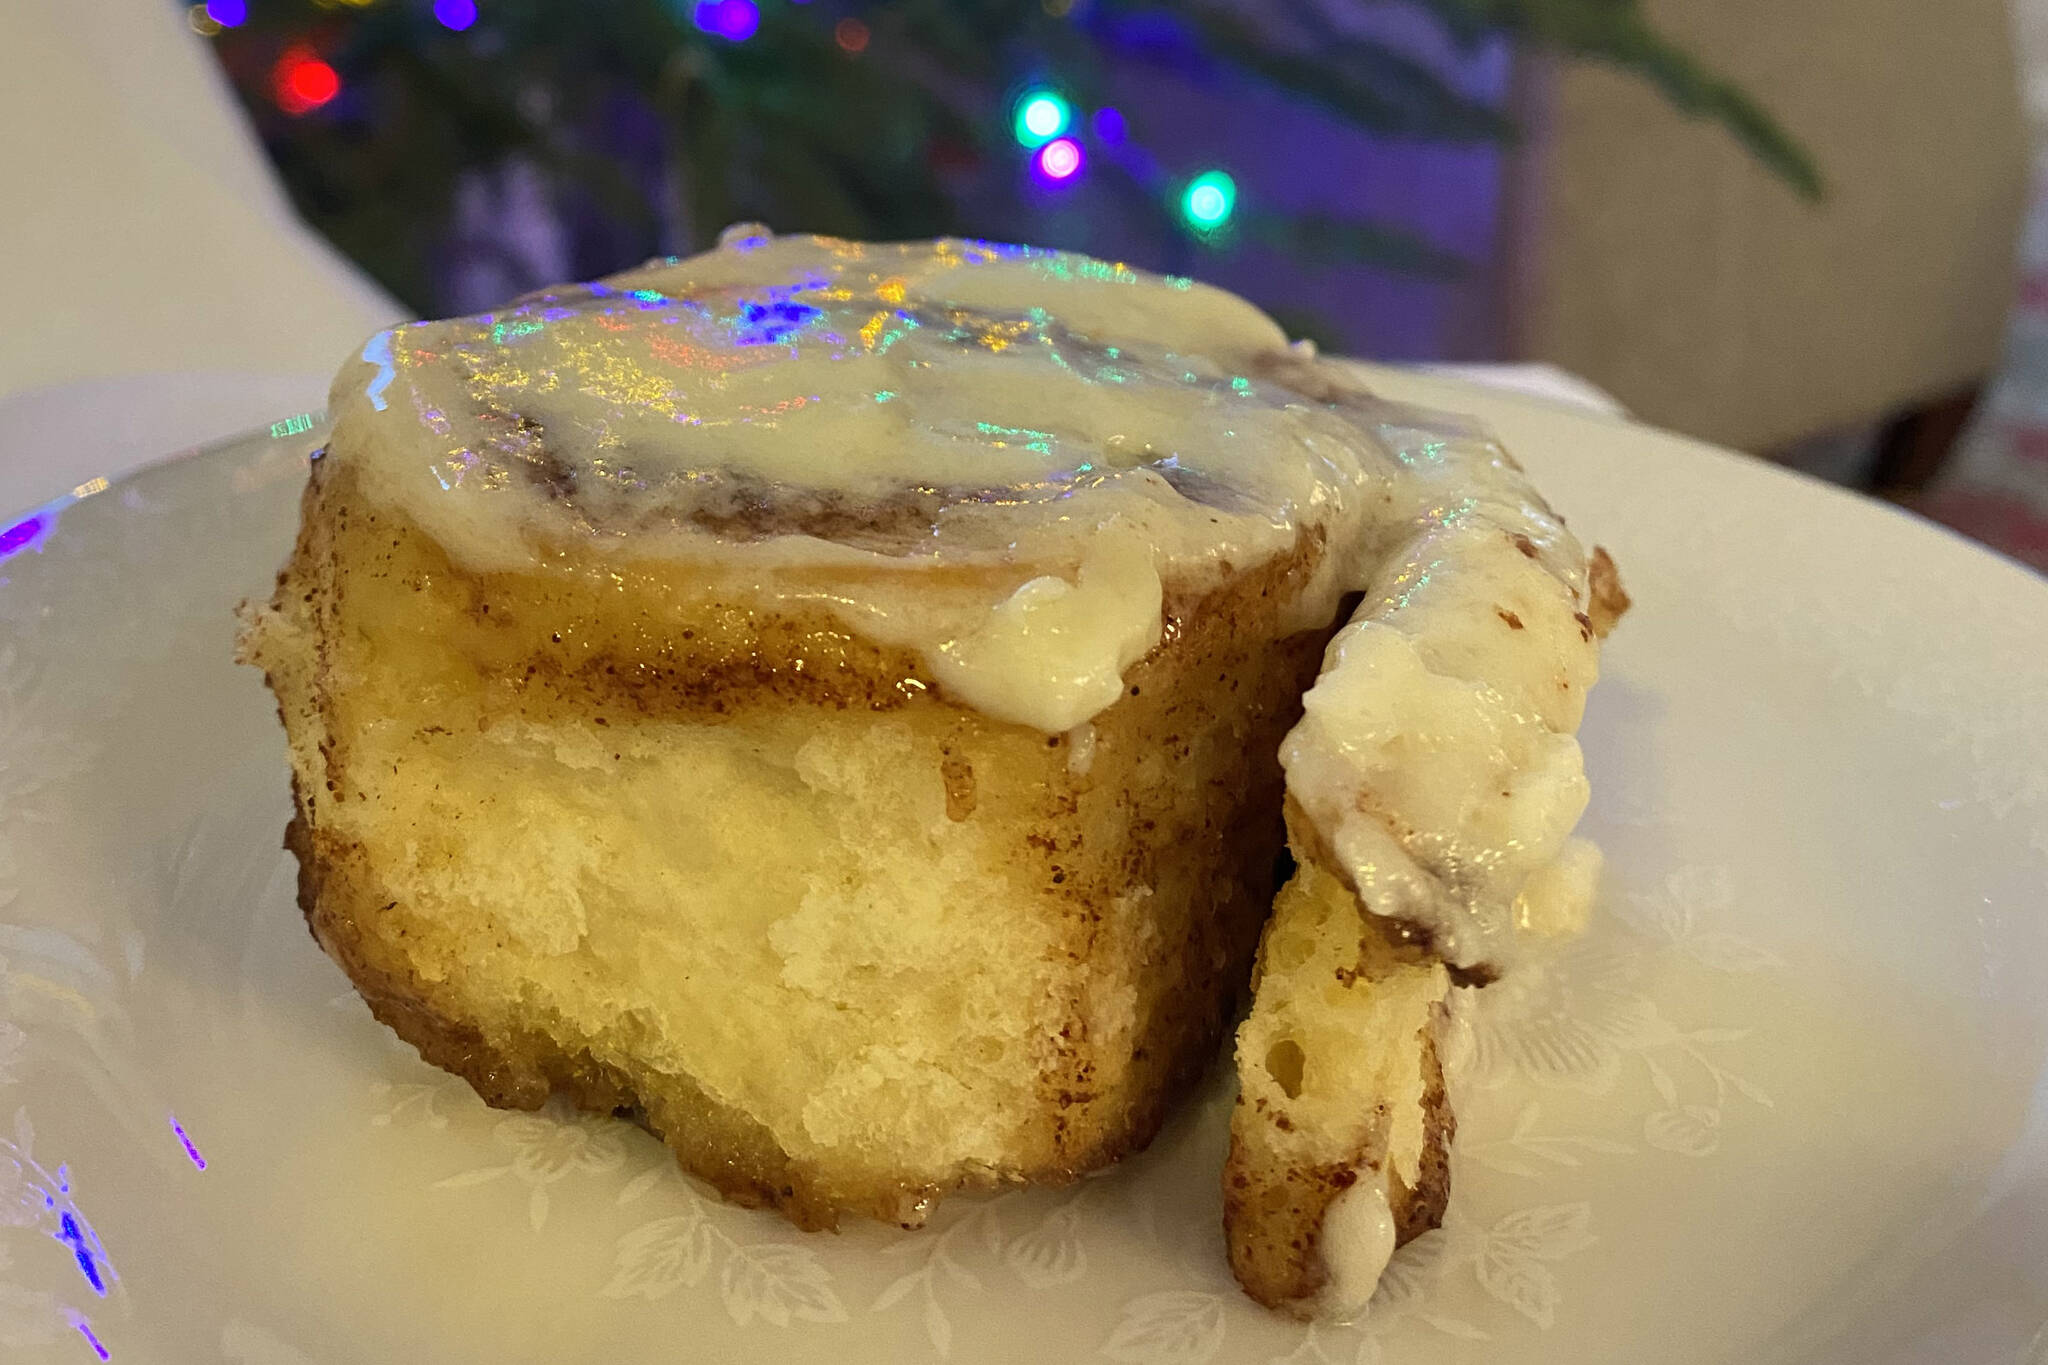 Soft and sticky cinnamon rolls incorporate the tastes of cinnamon and whipped cream cheese frosting. (Photo by Tressa Dale/Peninsula Clarion)